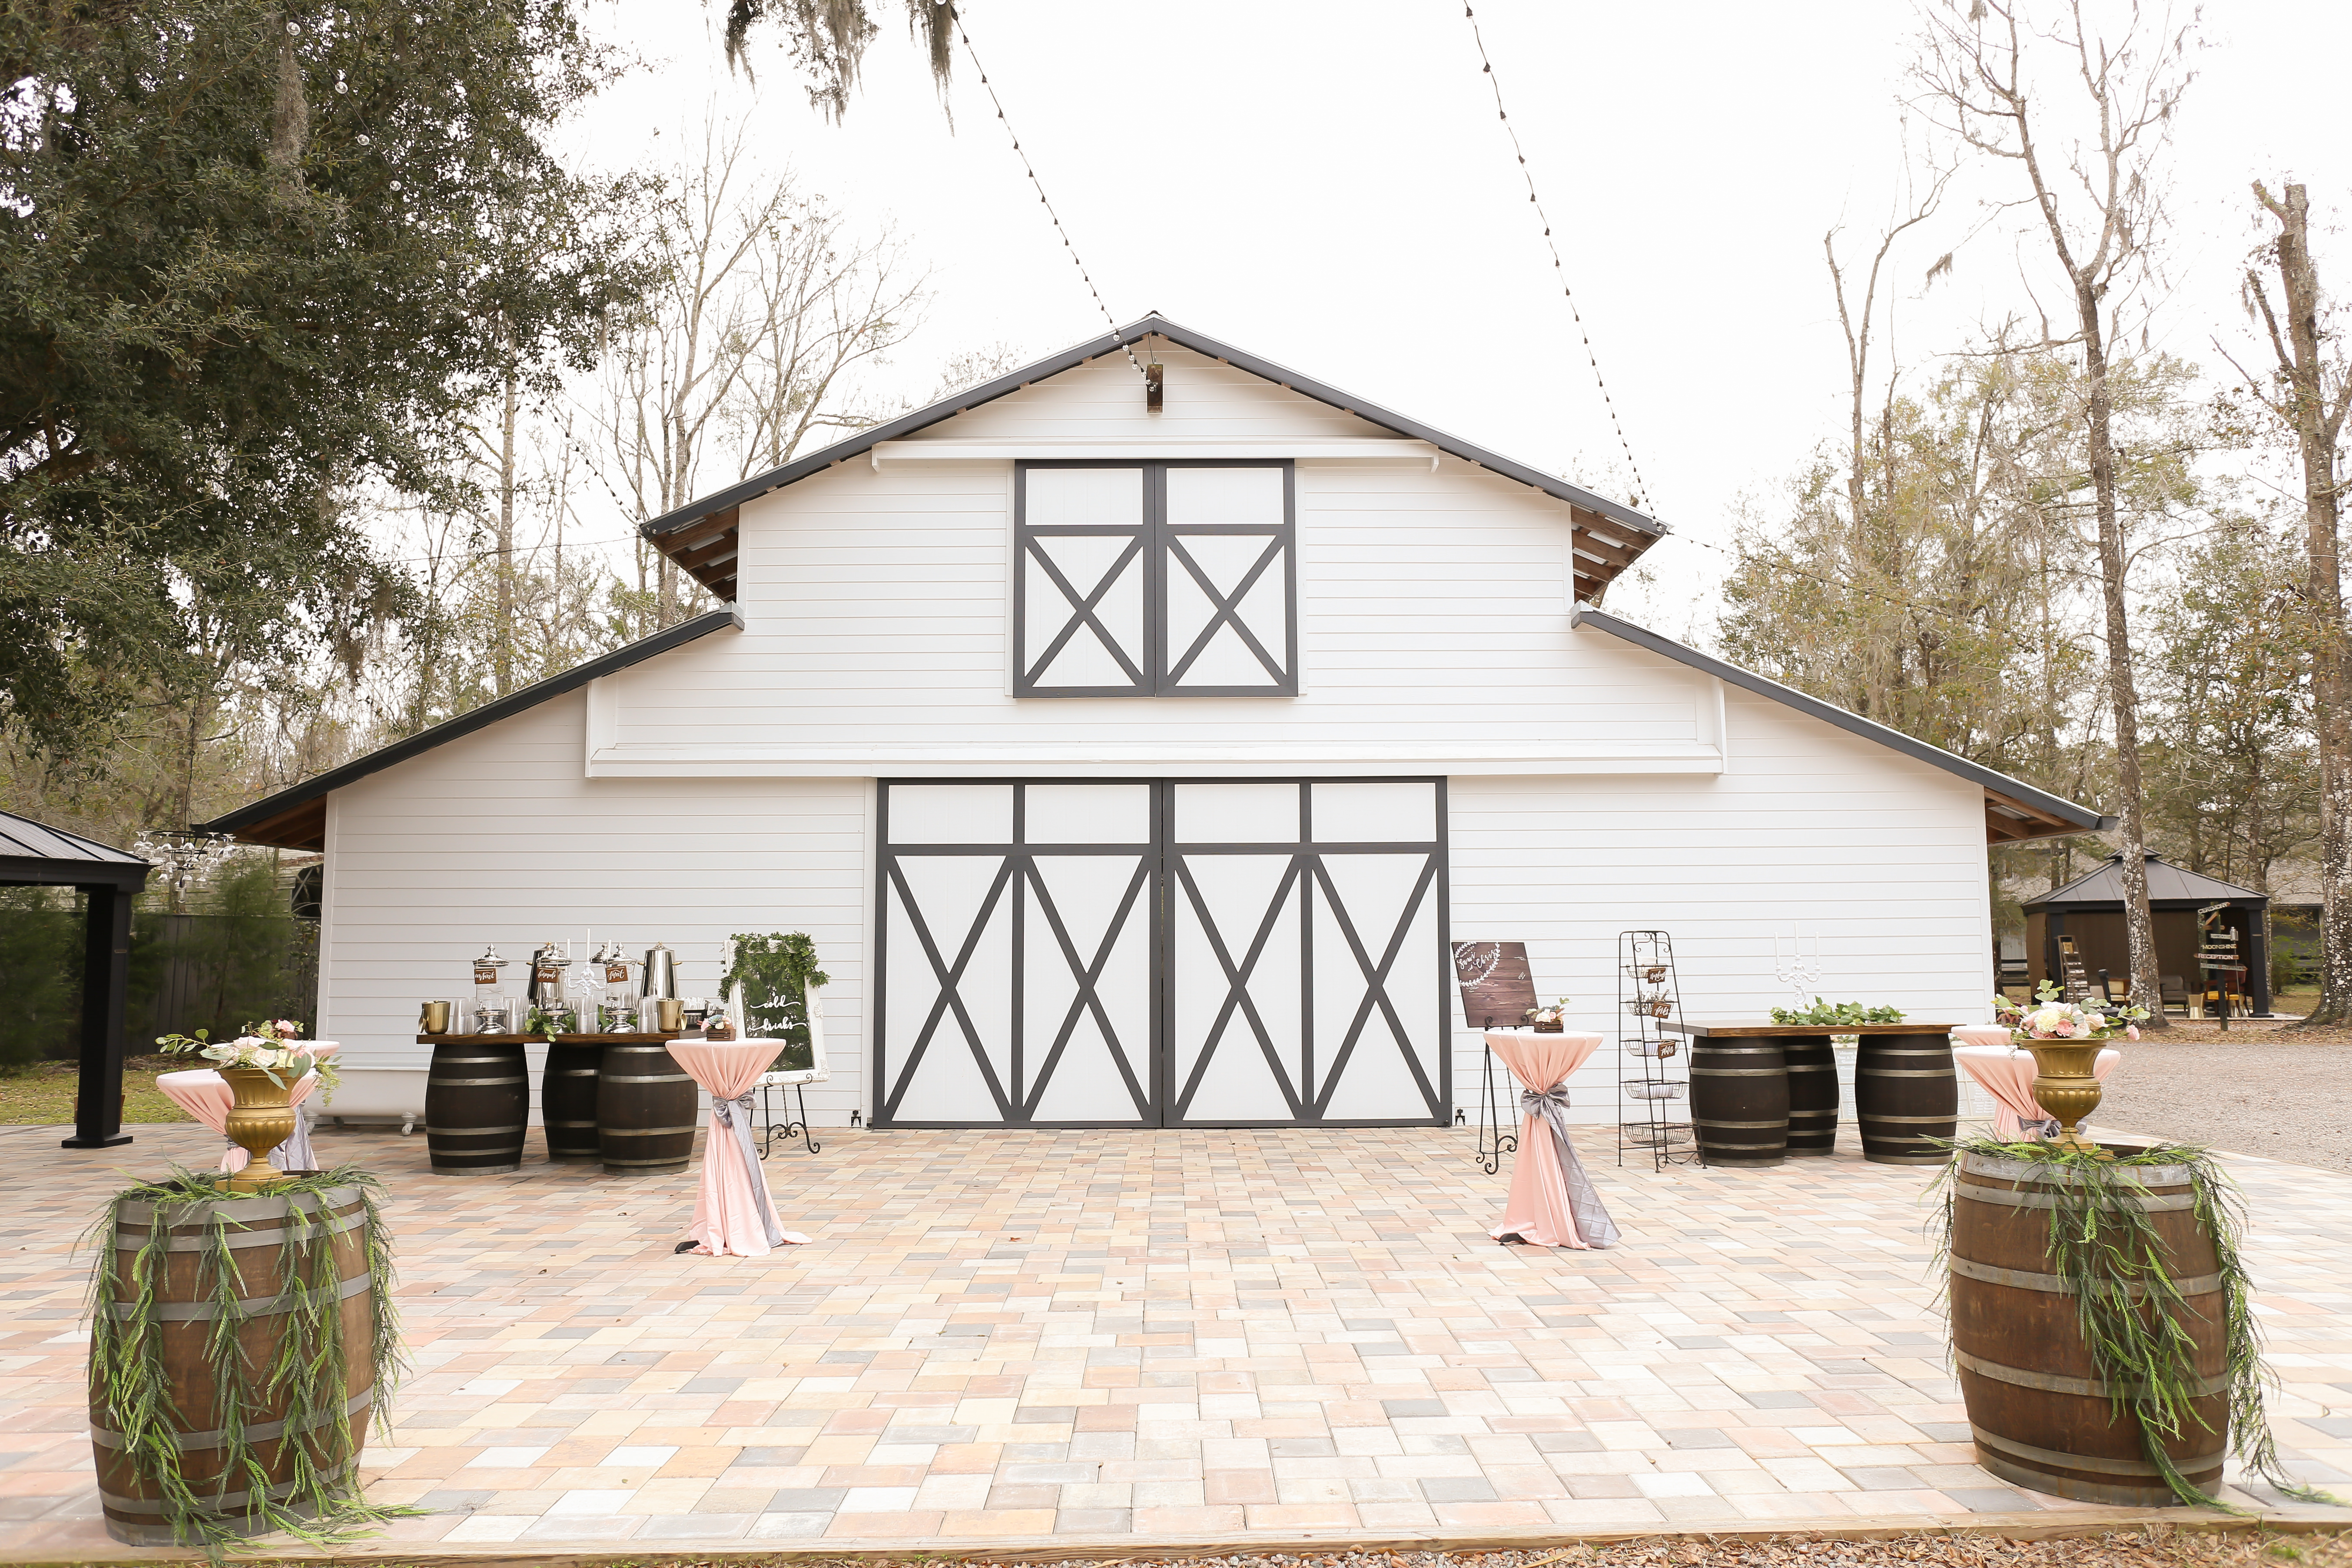 Rustic Wedding Ceremony Decor, Wooden Barrels with Greenery, Gold Vases and Florals, Cocktail Tables with Blush Pink Linens | Tampa Bay Wedding Photographer Lifelong Photography Studios | Rustic Florida Wedding Venue The White Barn